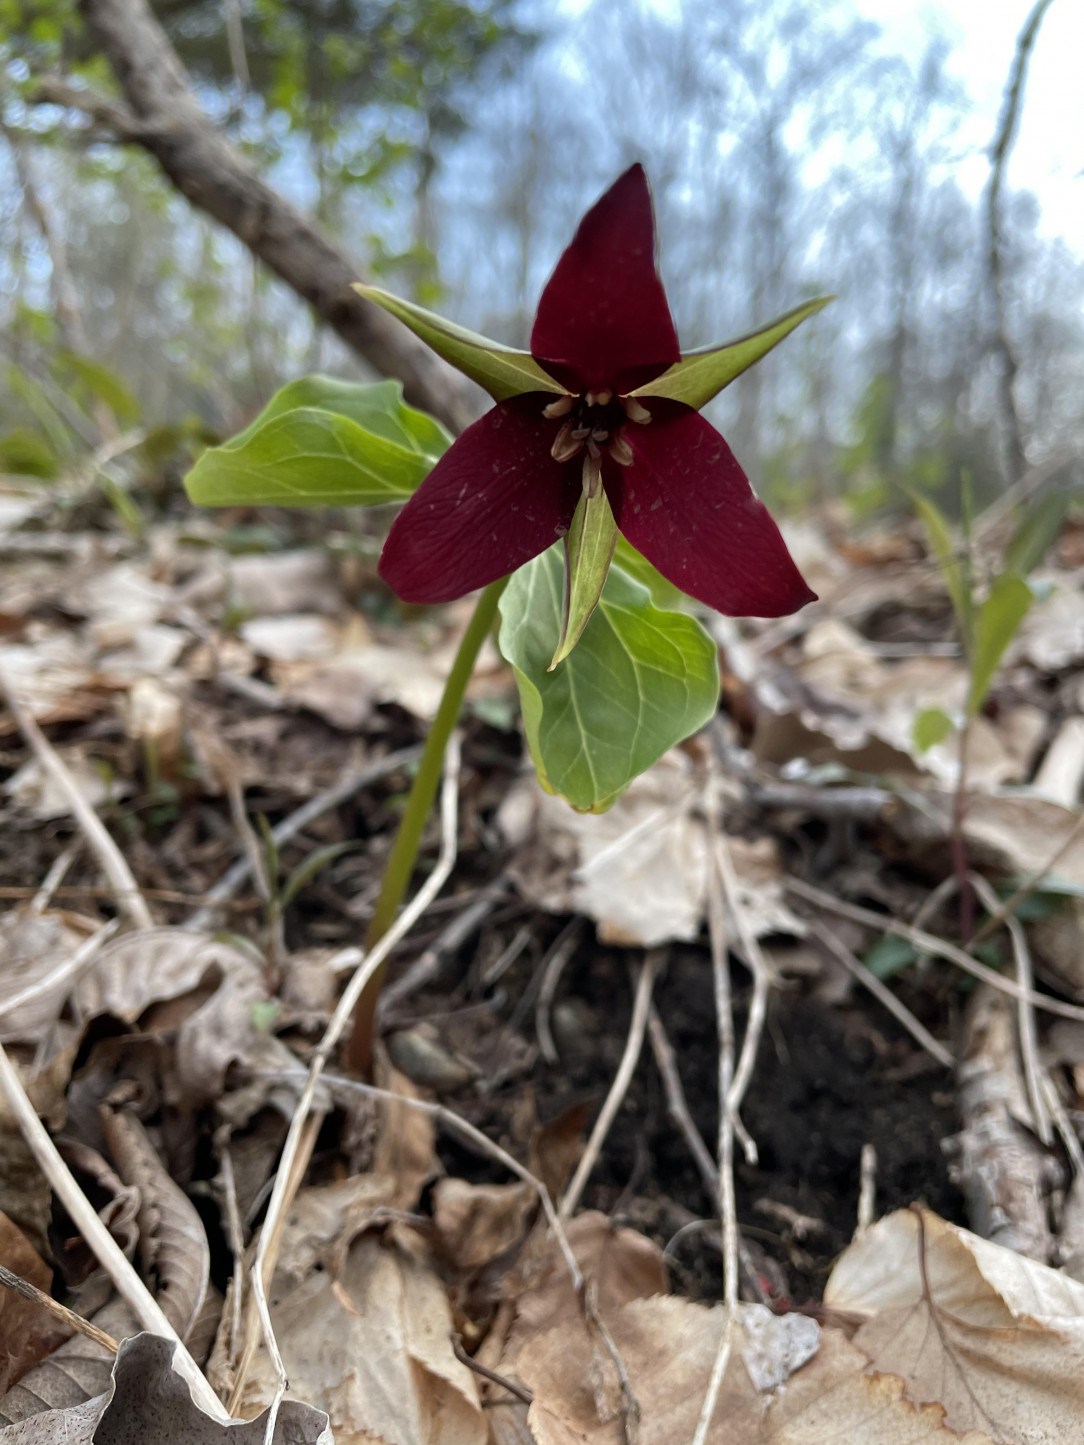 Enjoy this picture of a Red Trillium